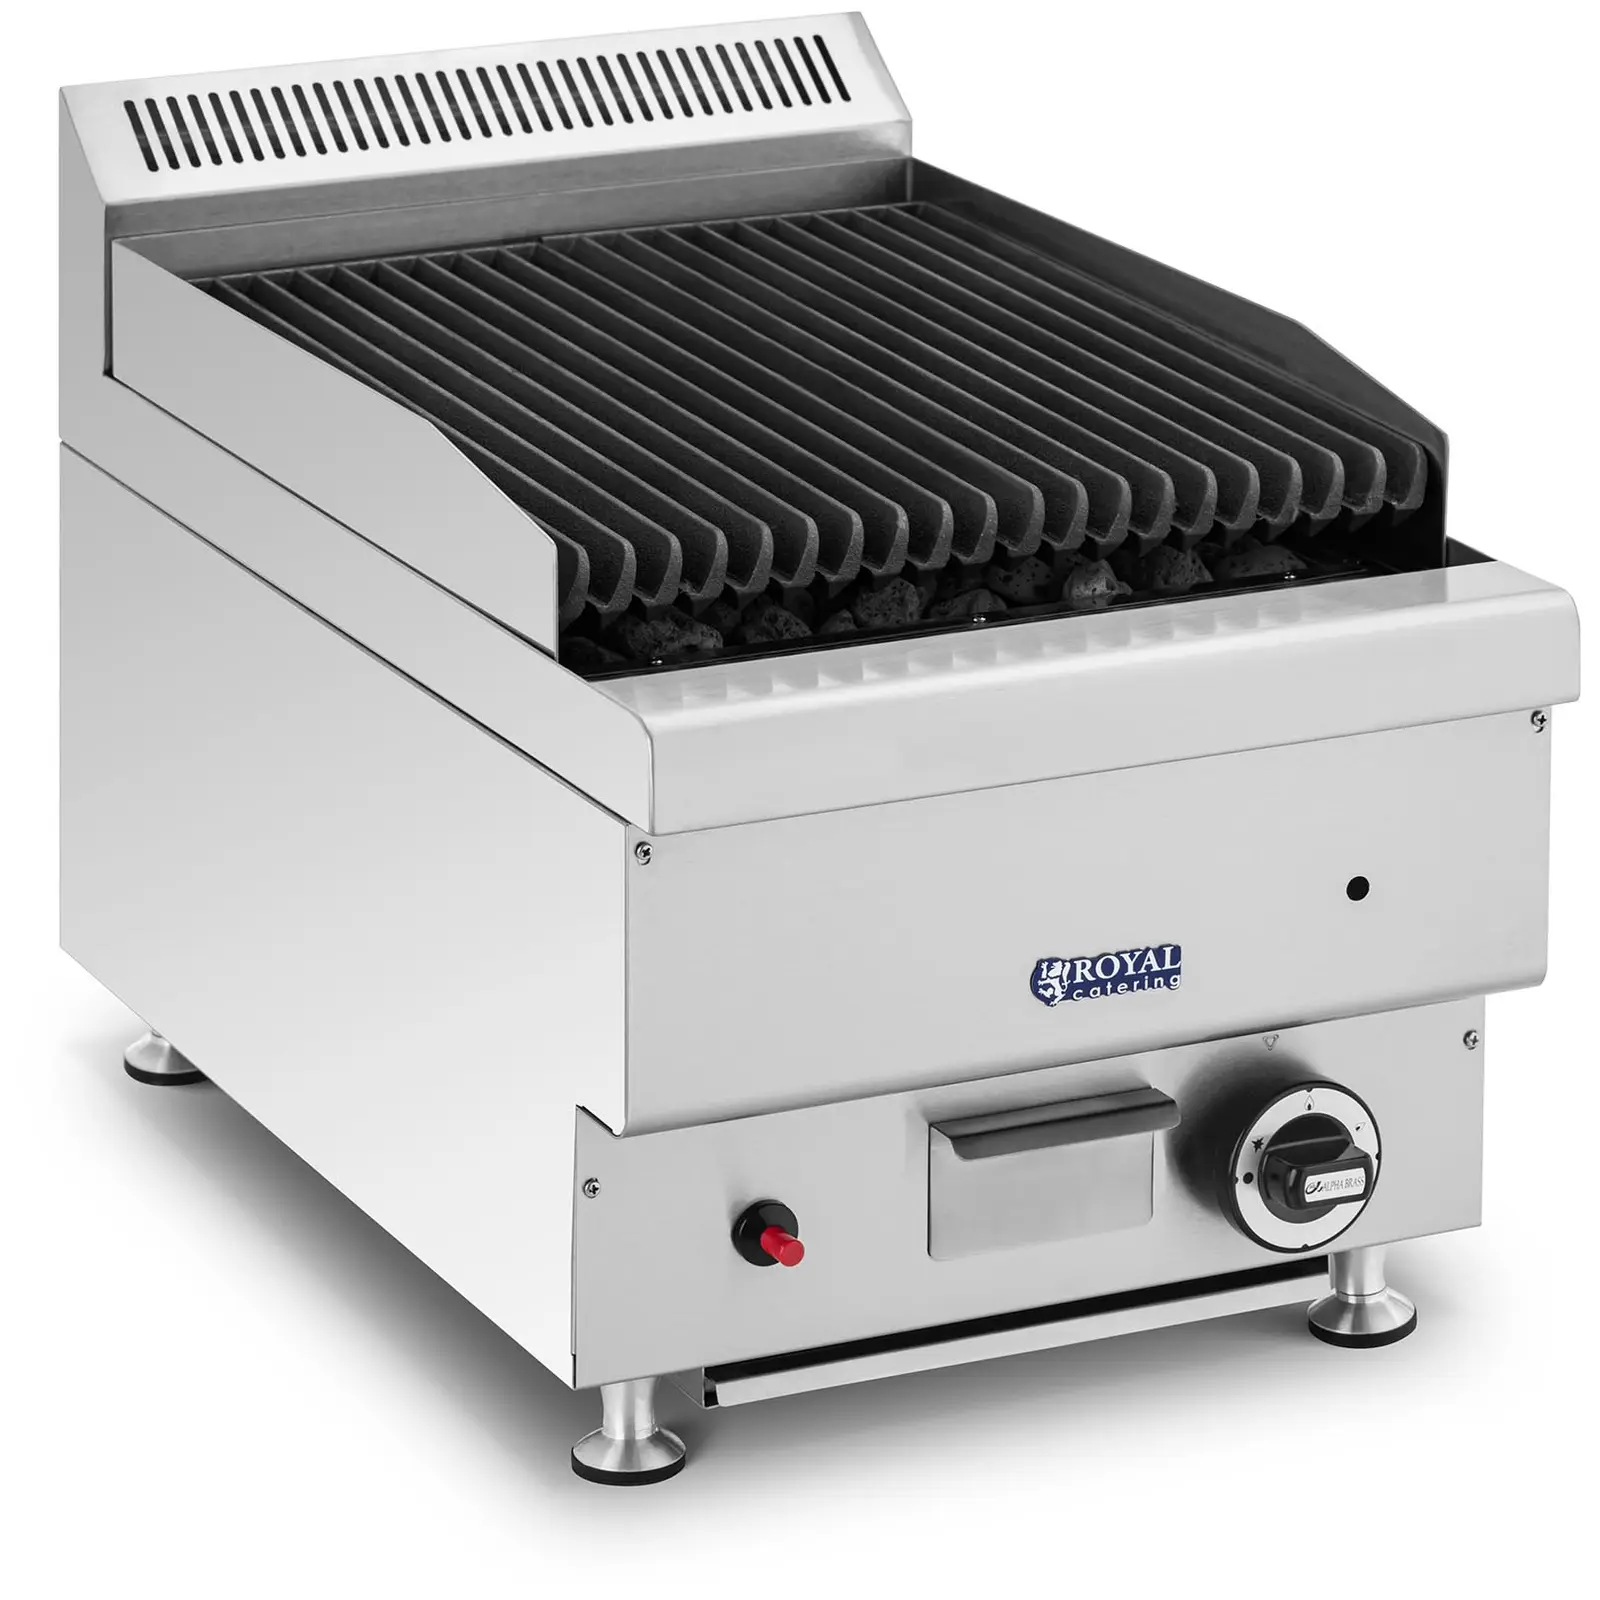 Lavastensgrill - naturgas - 7200 W - 50 x 27 cm - 0 - 460 °C - Royal Catering